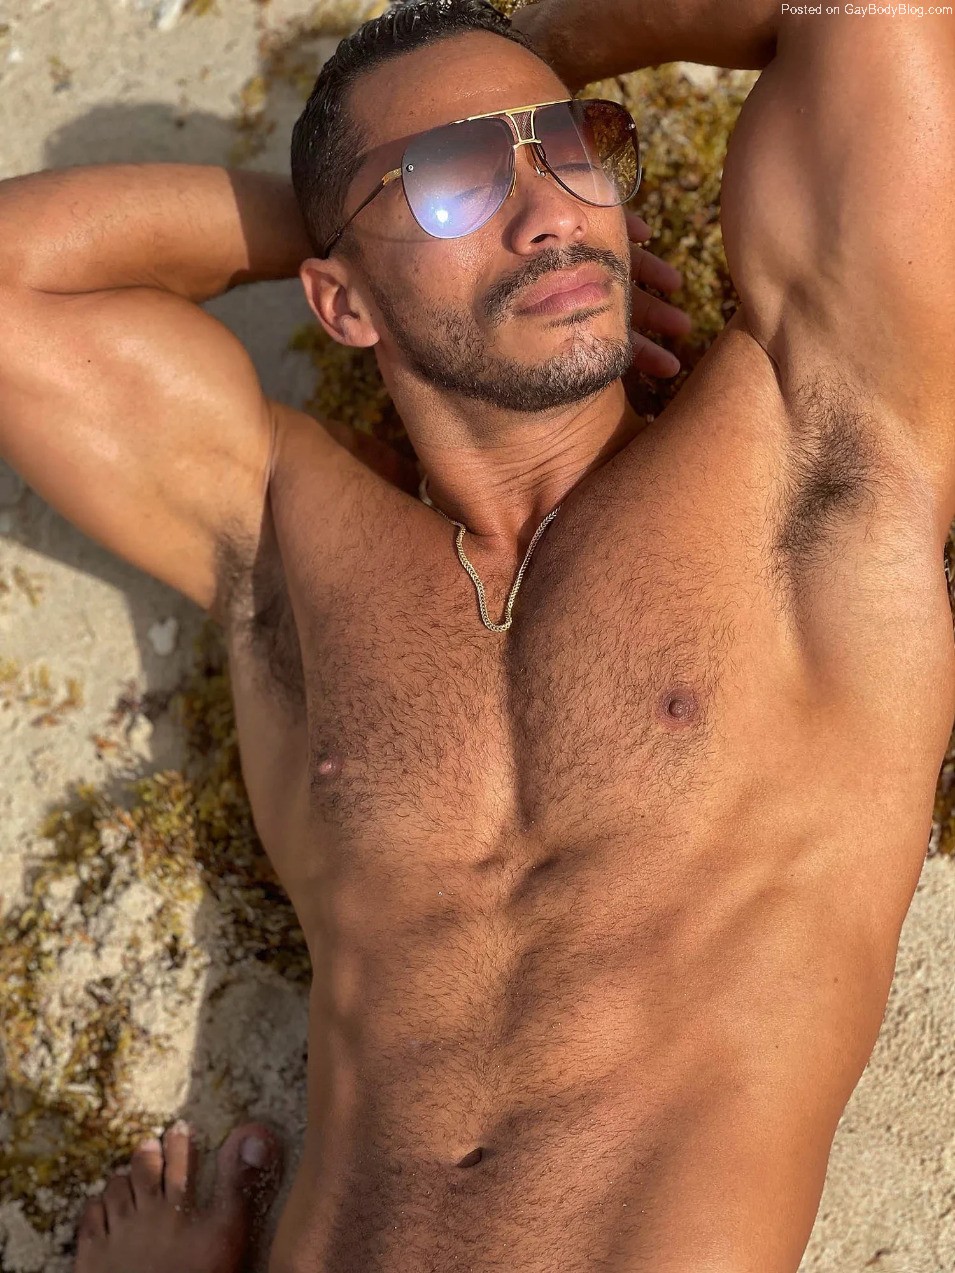 More Of Alexander Ortega Borja Showing Cock At The Beach! - Gay Body Blog -  Pics of Male Models, Celebrities, Nude Art, & Porn Stars